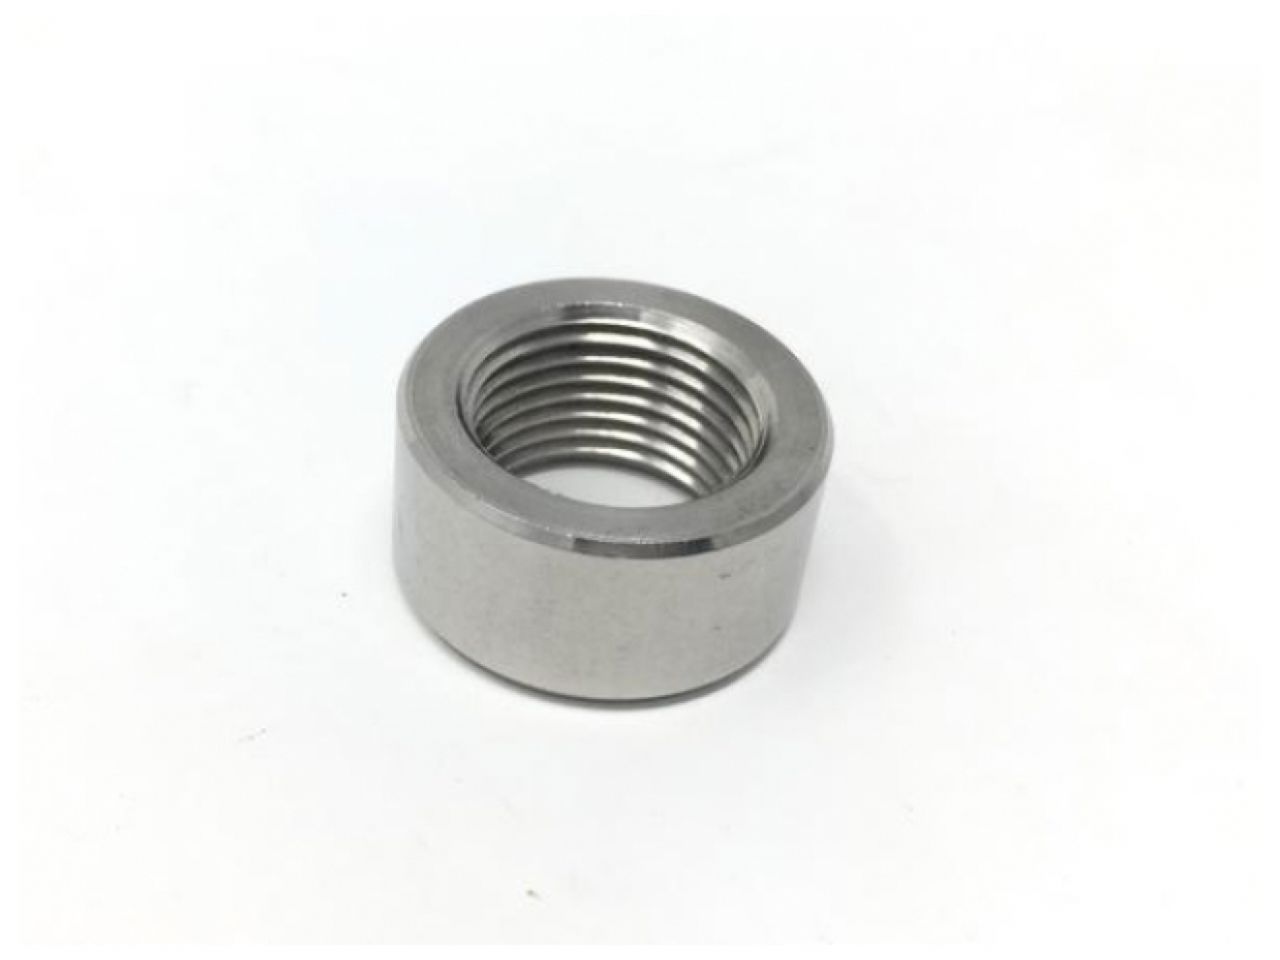 Flat Weldable O2 Sensor Bung M18 x 1.5 - Stainless - Straight